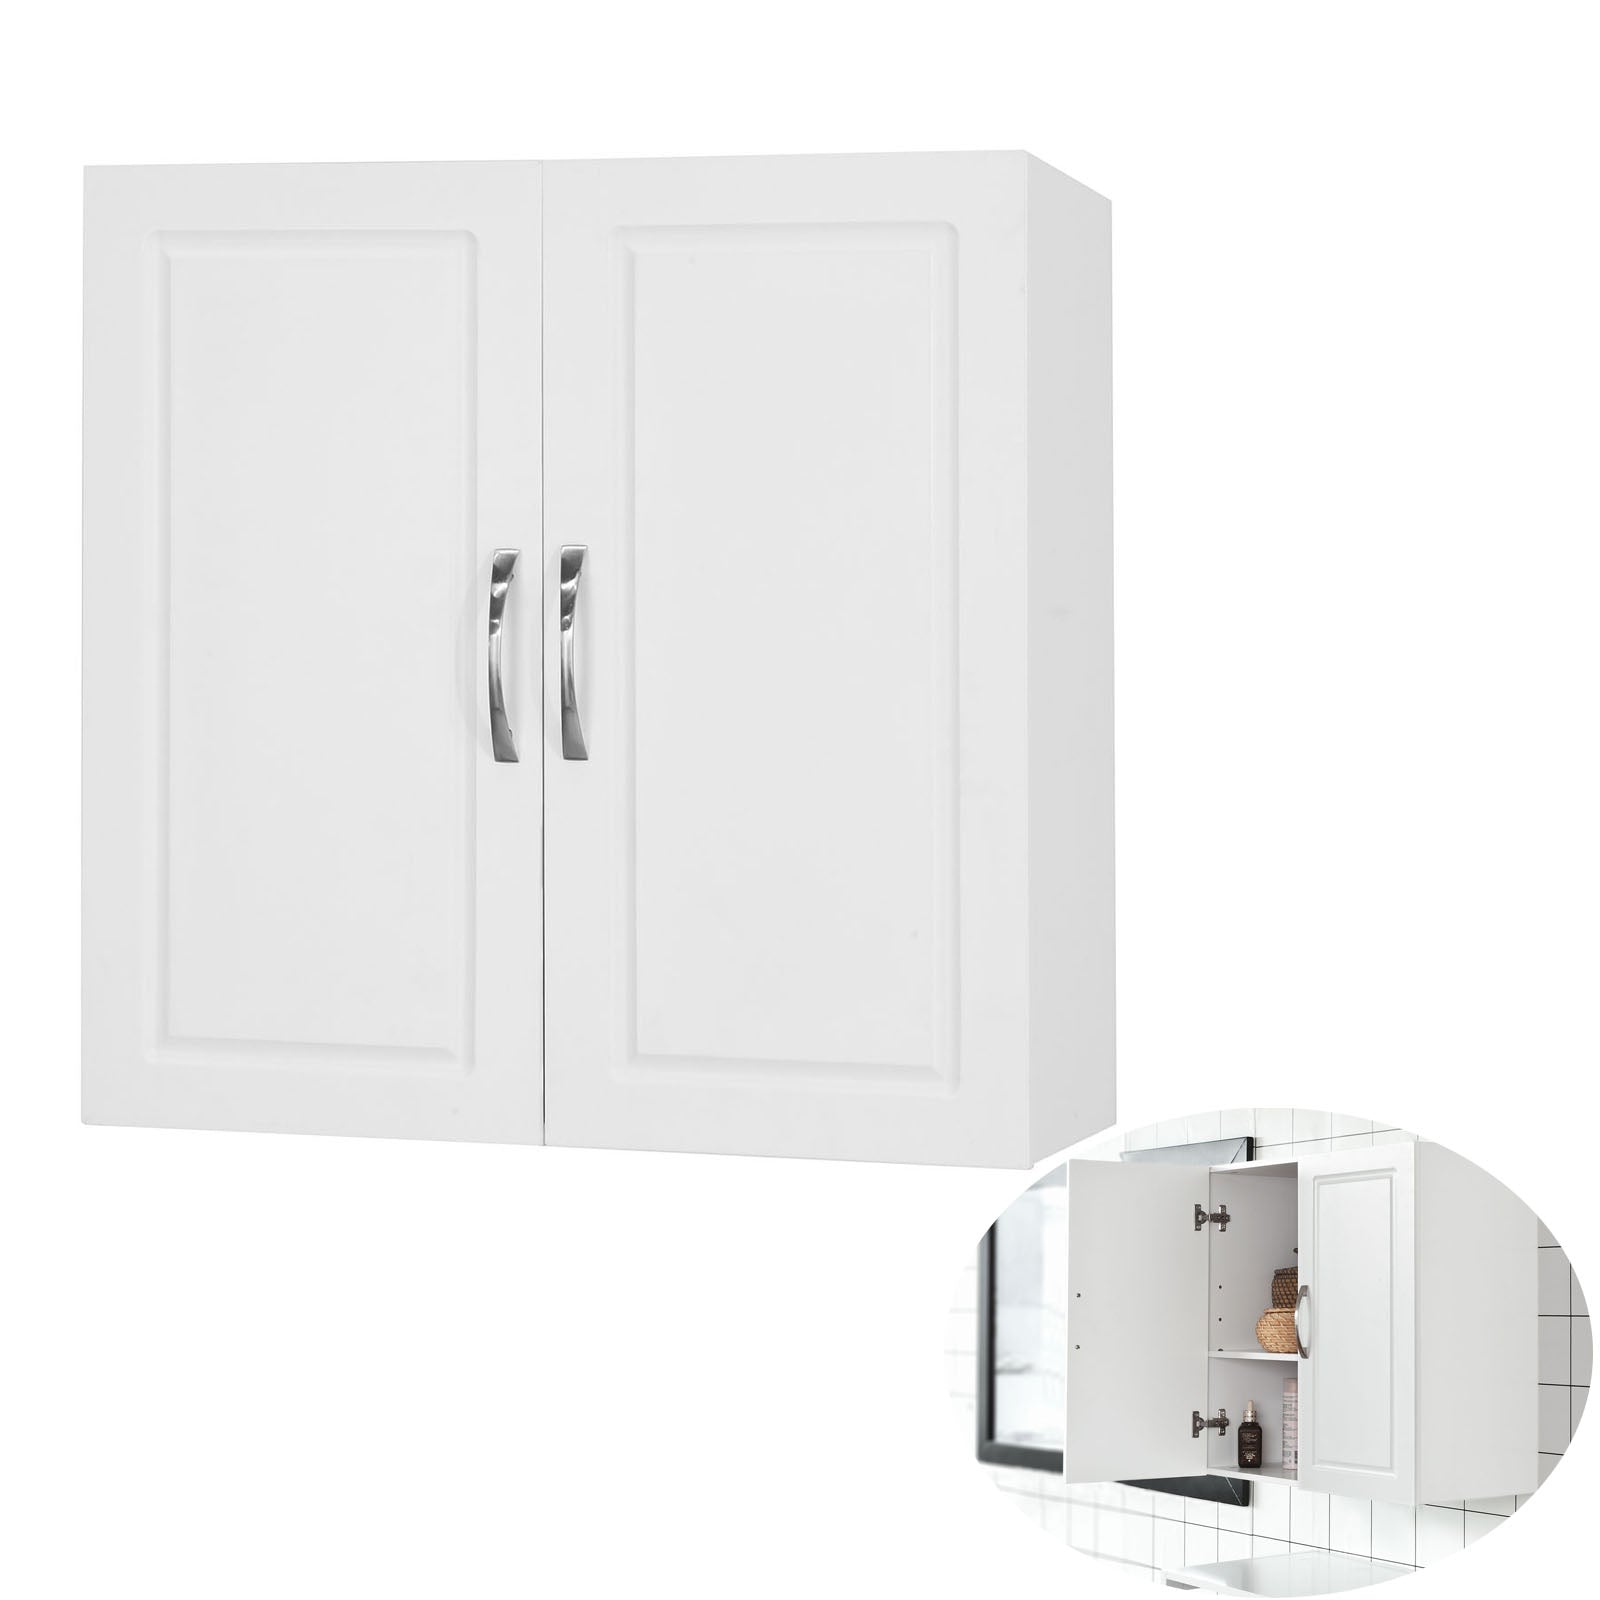 SoBuy White Kitchen Bathroom Wall Unit with Double Doors FRG231-W